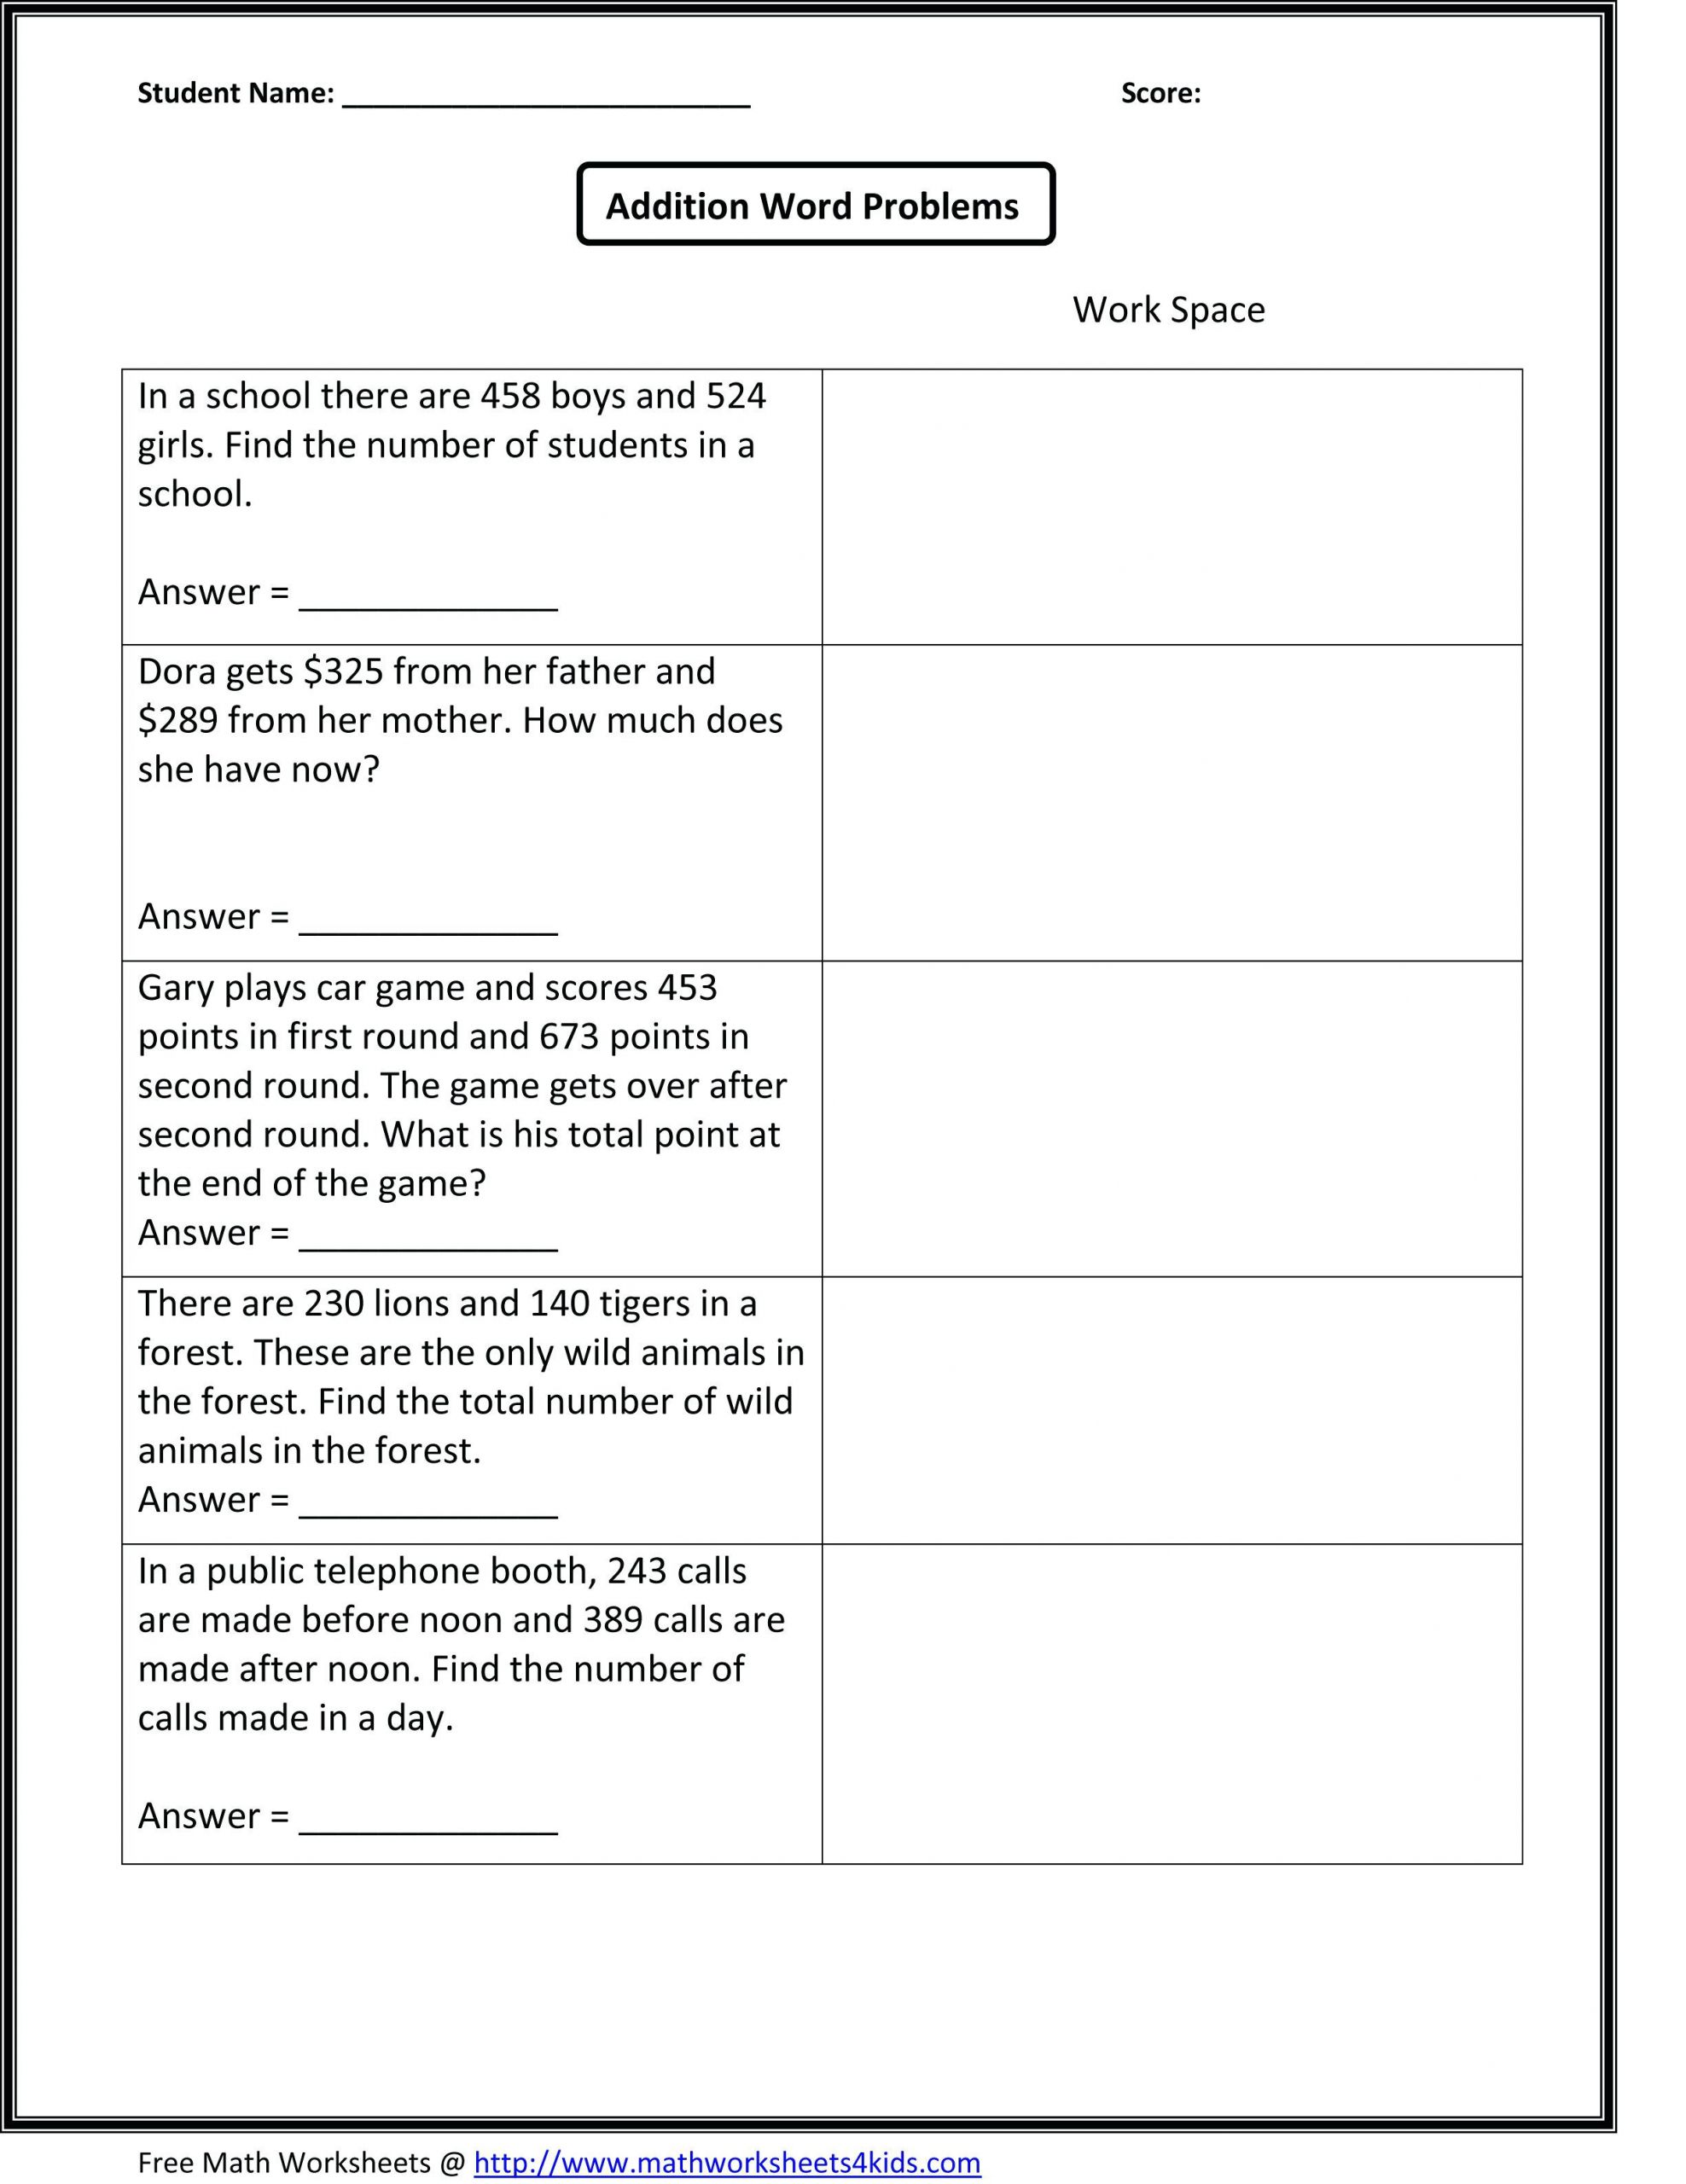 word problems for 5th grade word problems worksheets halloween division word problems 5th grade